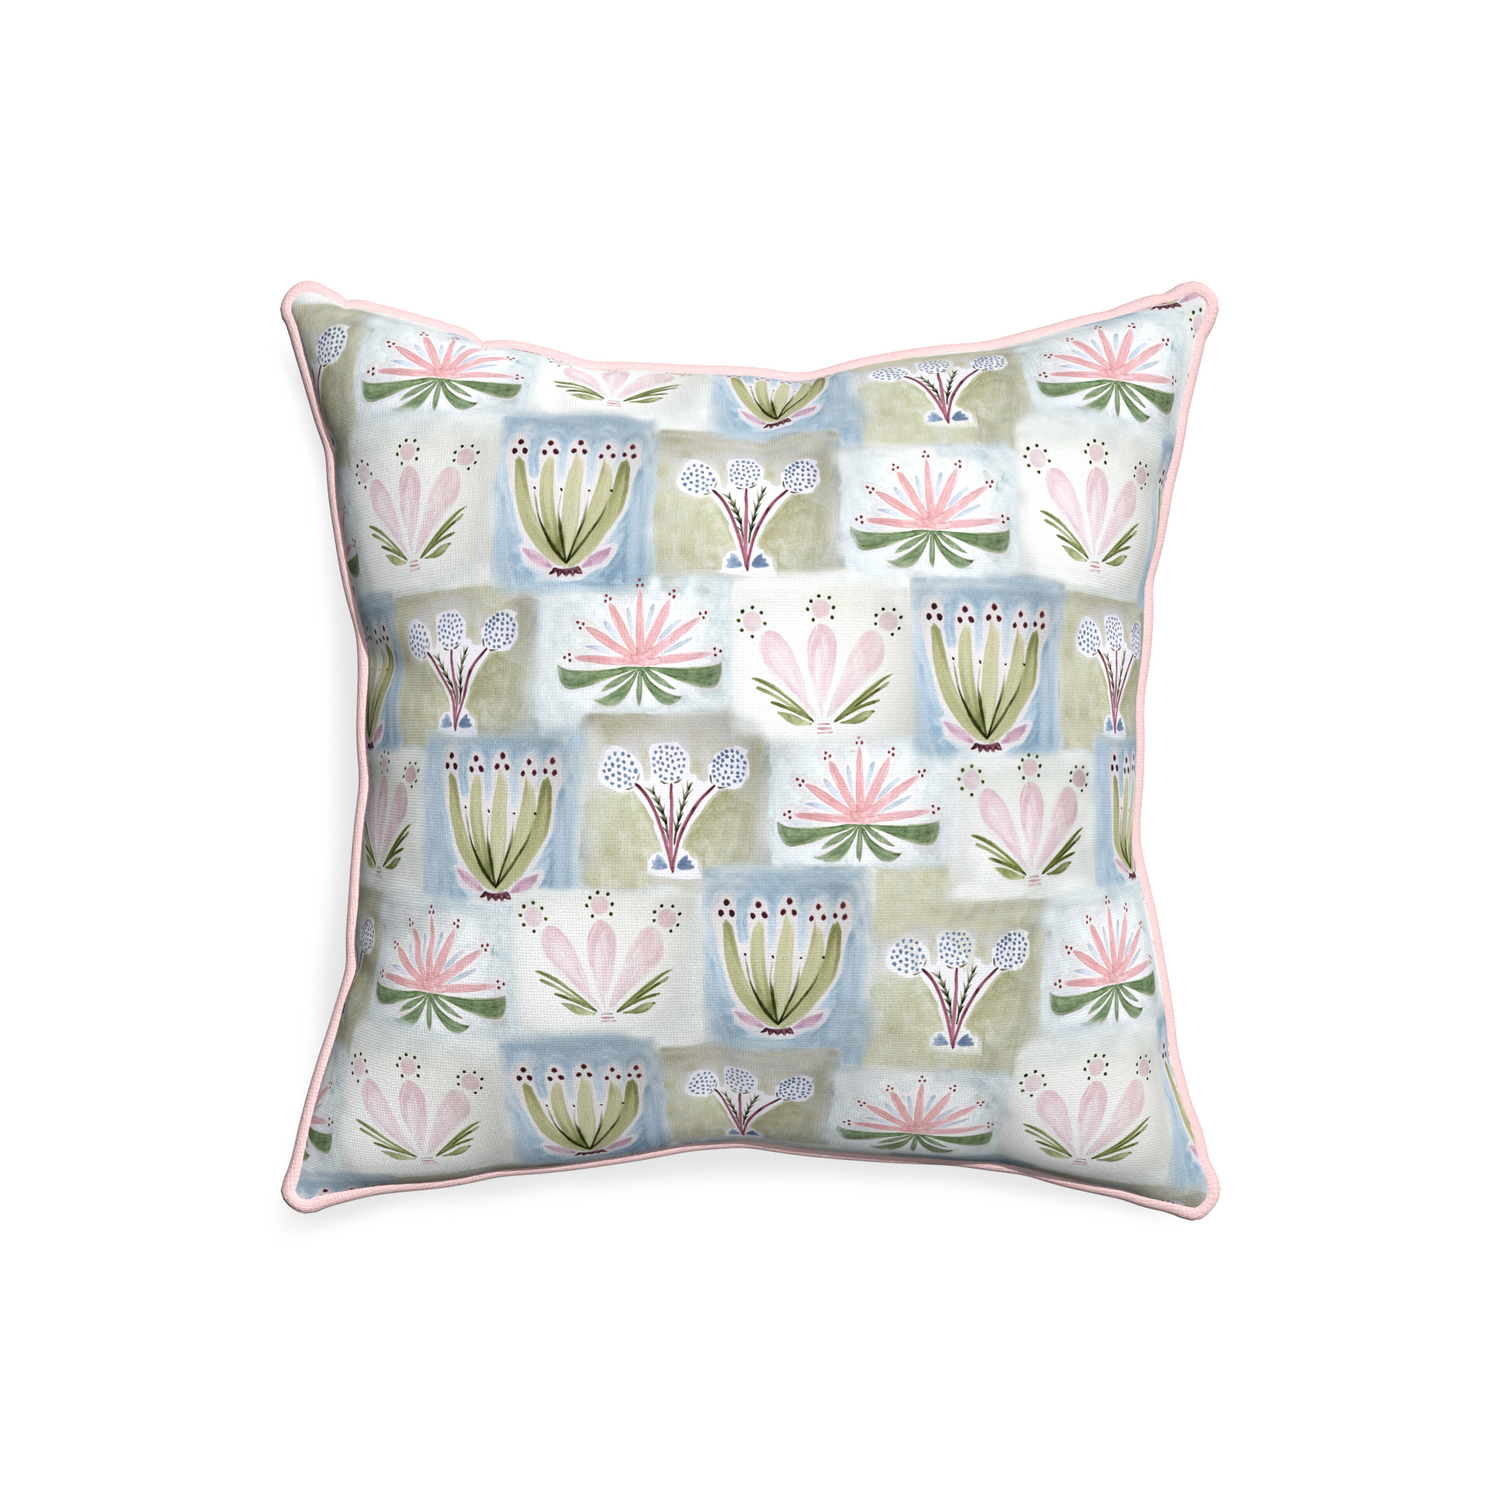 20-square harper custom hand-painted floralpillow with petal piping on white background